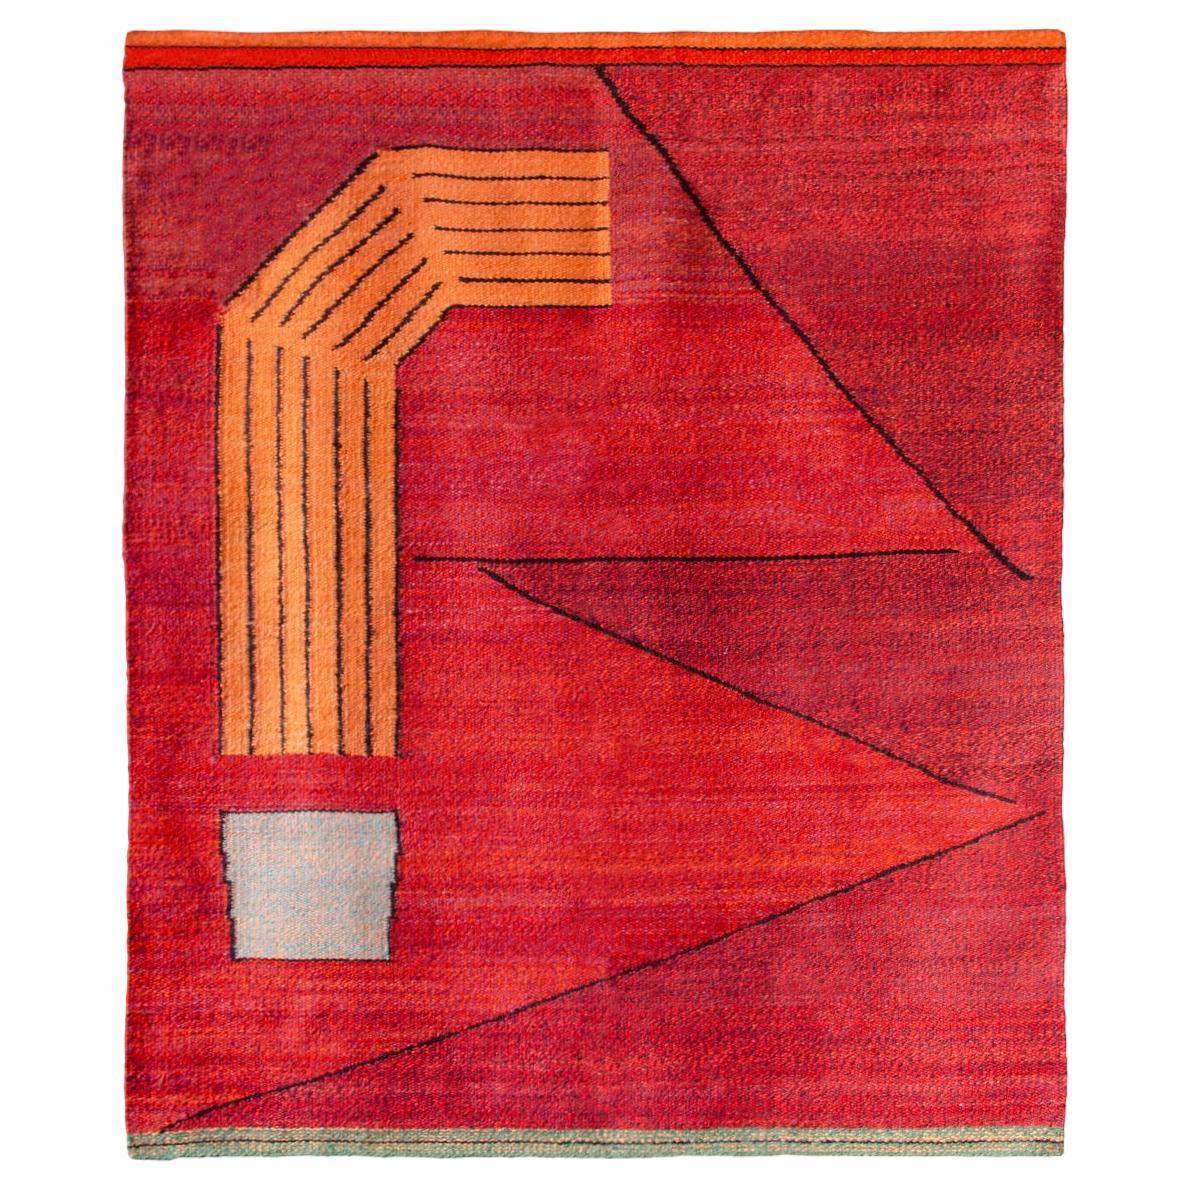 Hand-woven wool rug "Mallki" by Alejandro Puente